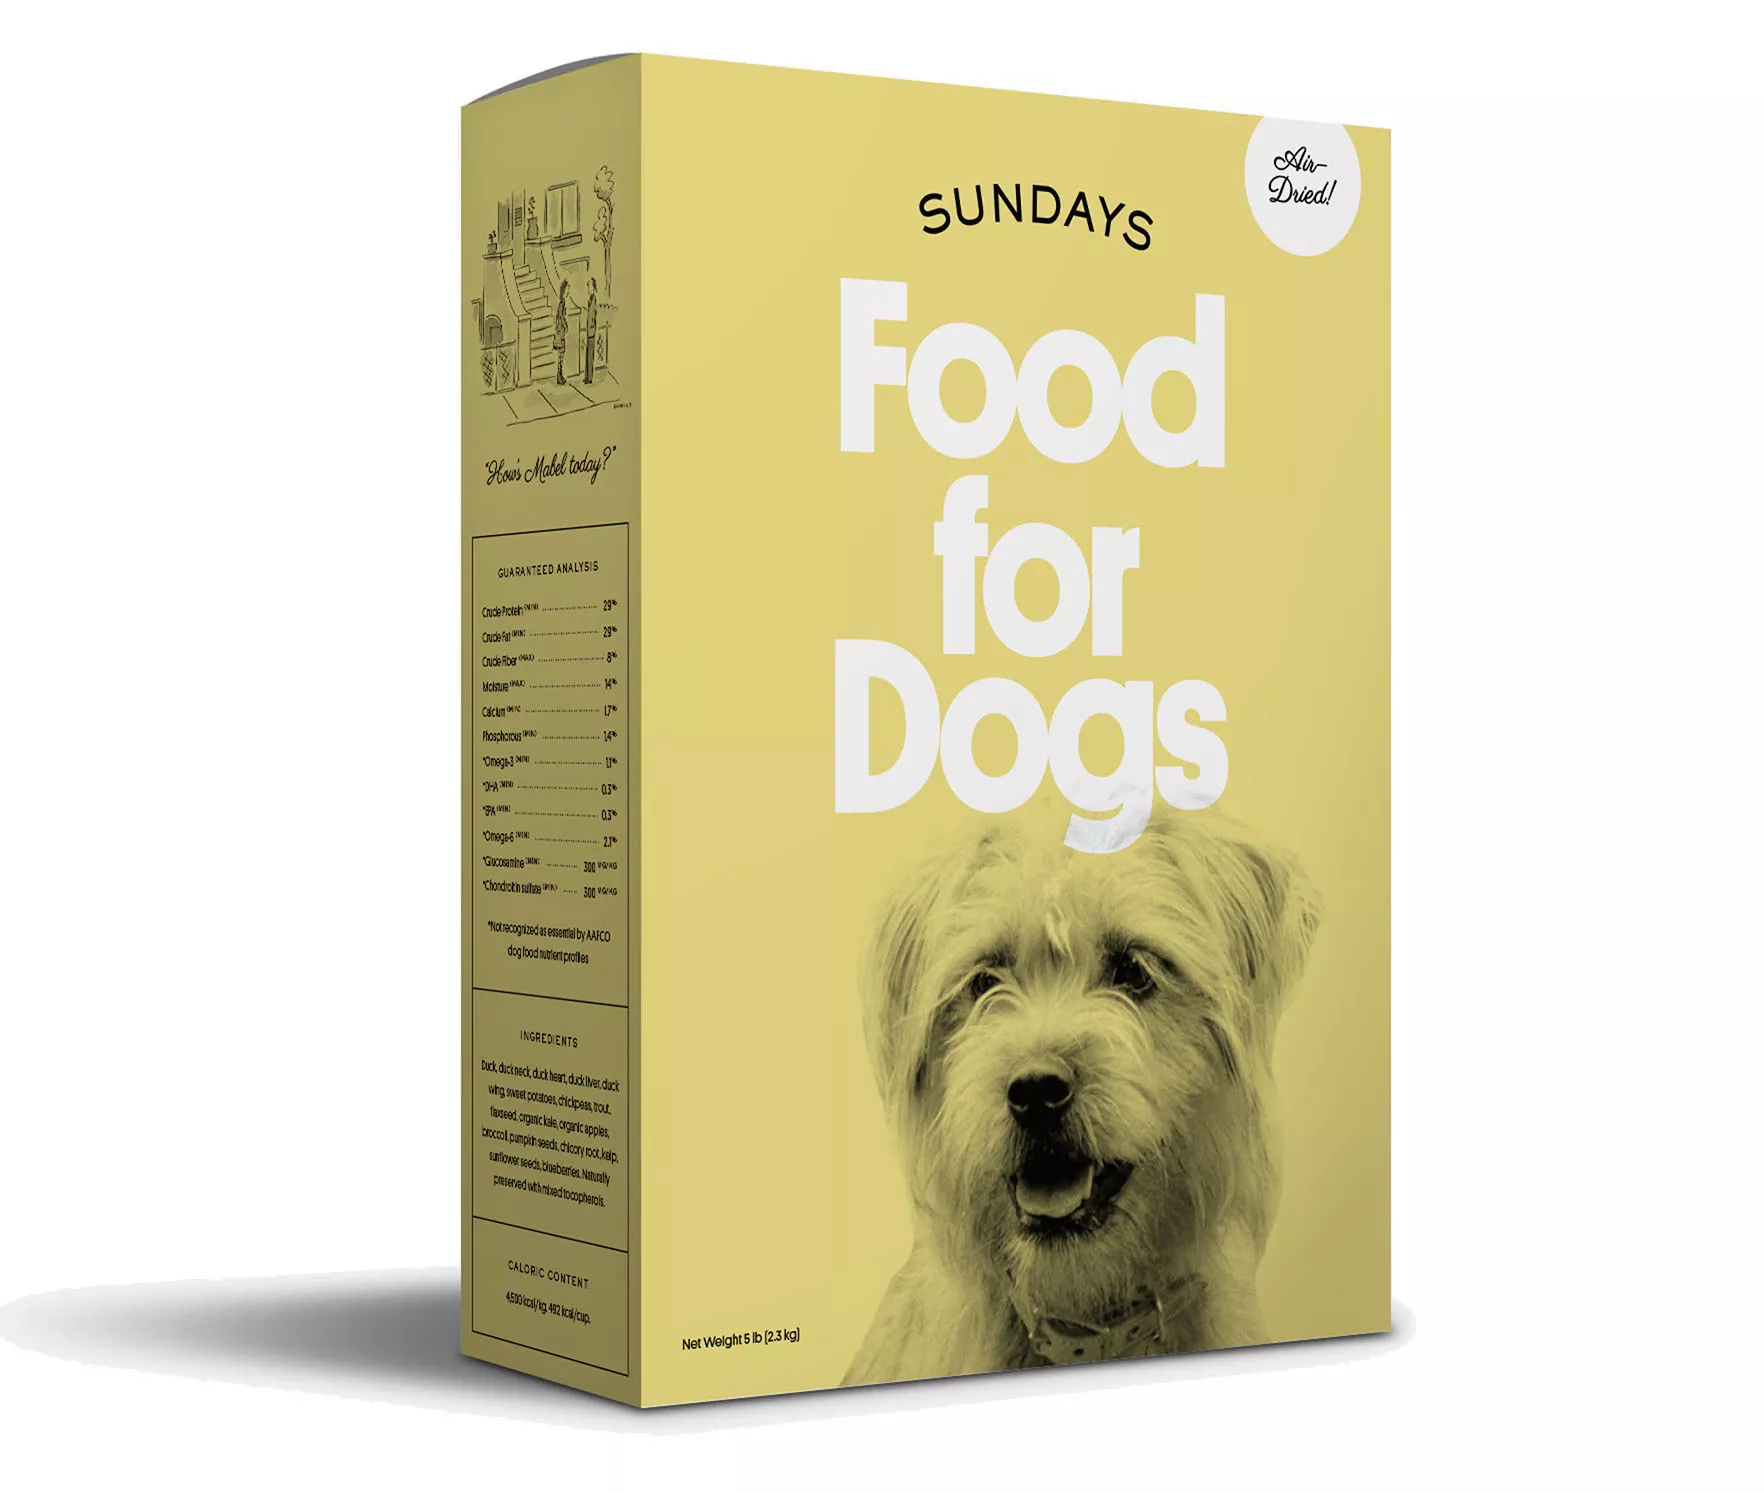 Sundays Food for Dogs